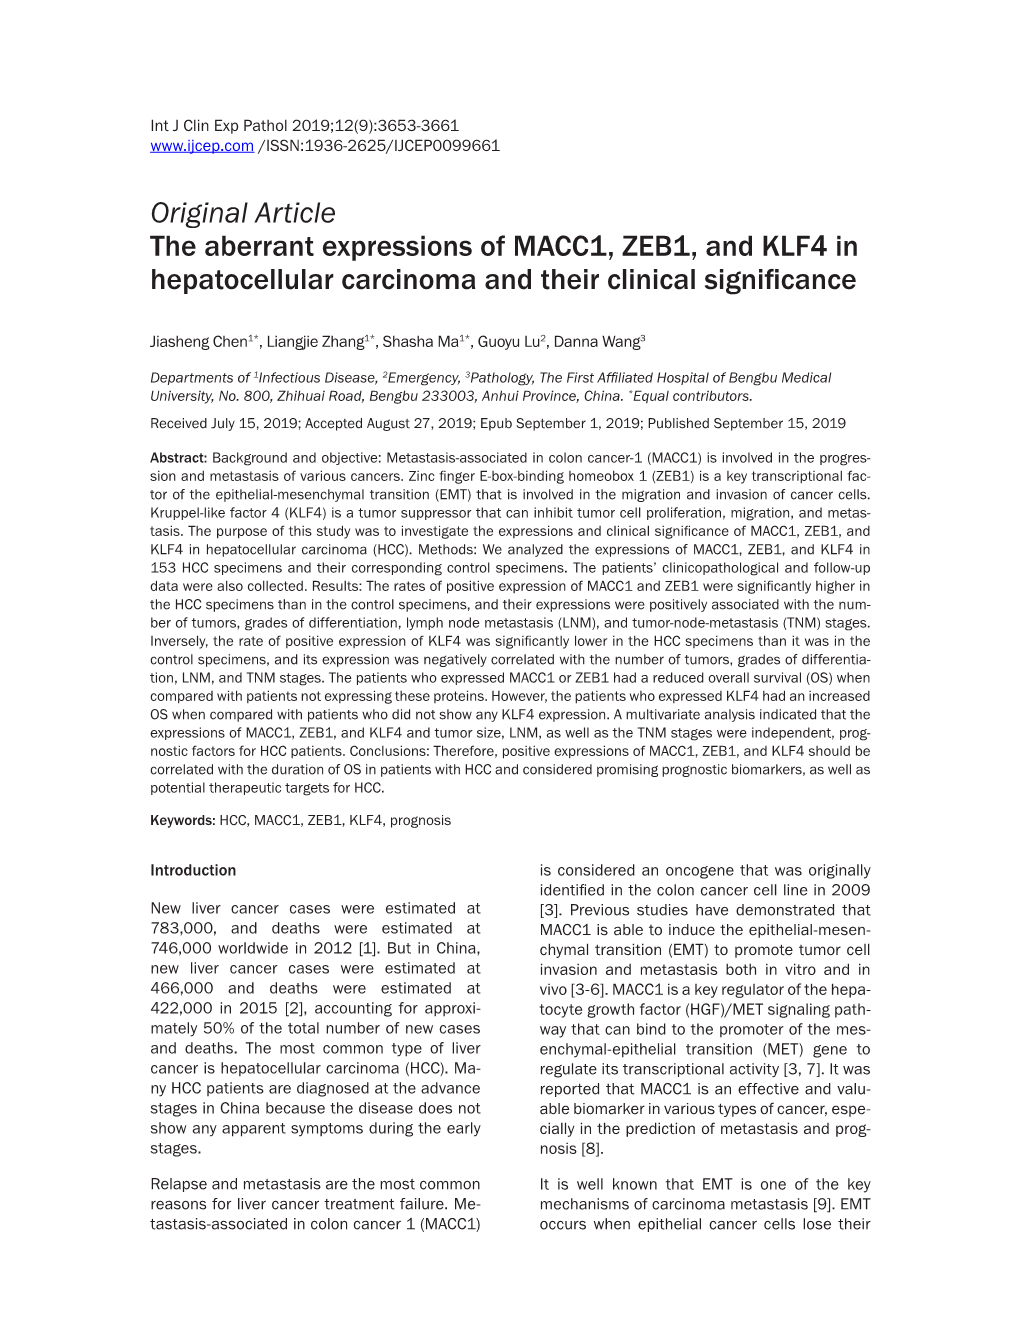 Original Article the Aberrant Expressions of MACC1, ZEB1, and KLF4 in Hepatocellular Carcinoma and Their Clinical Significance